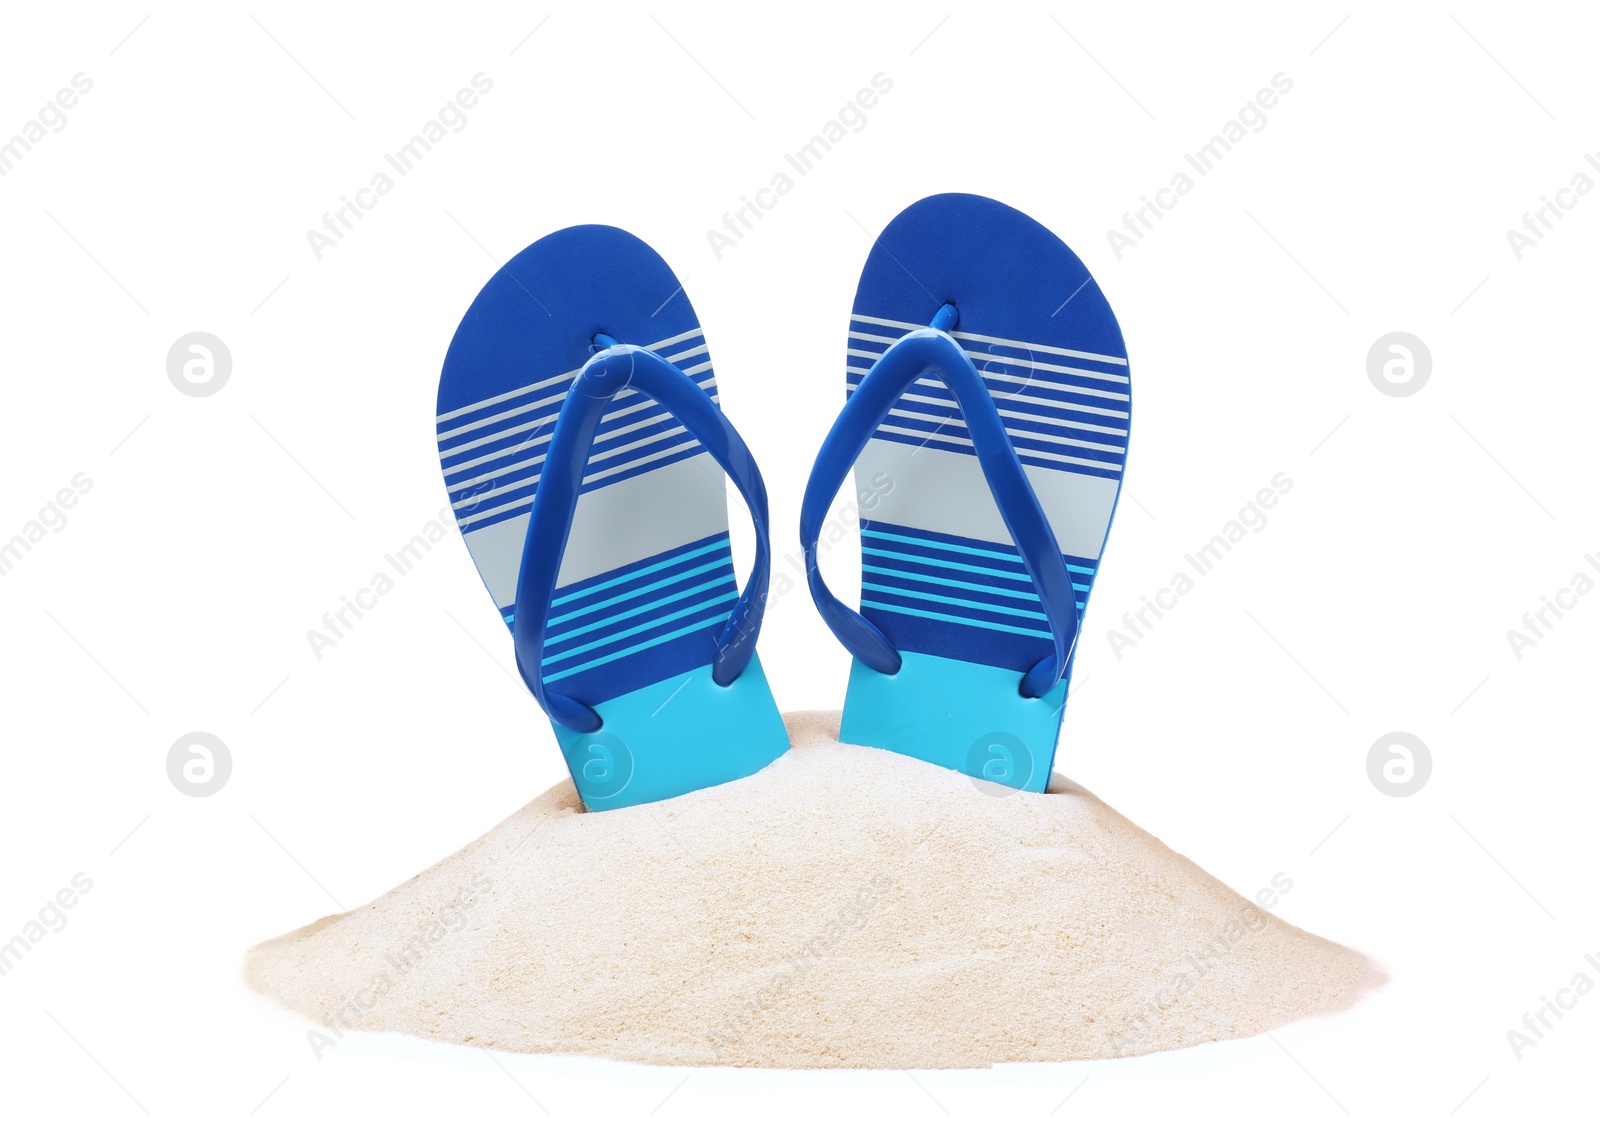 Photo of Striped flip flops in sand on white background